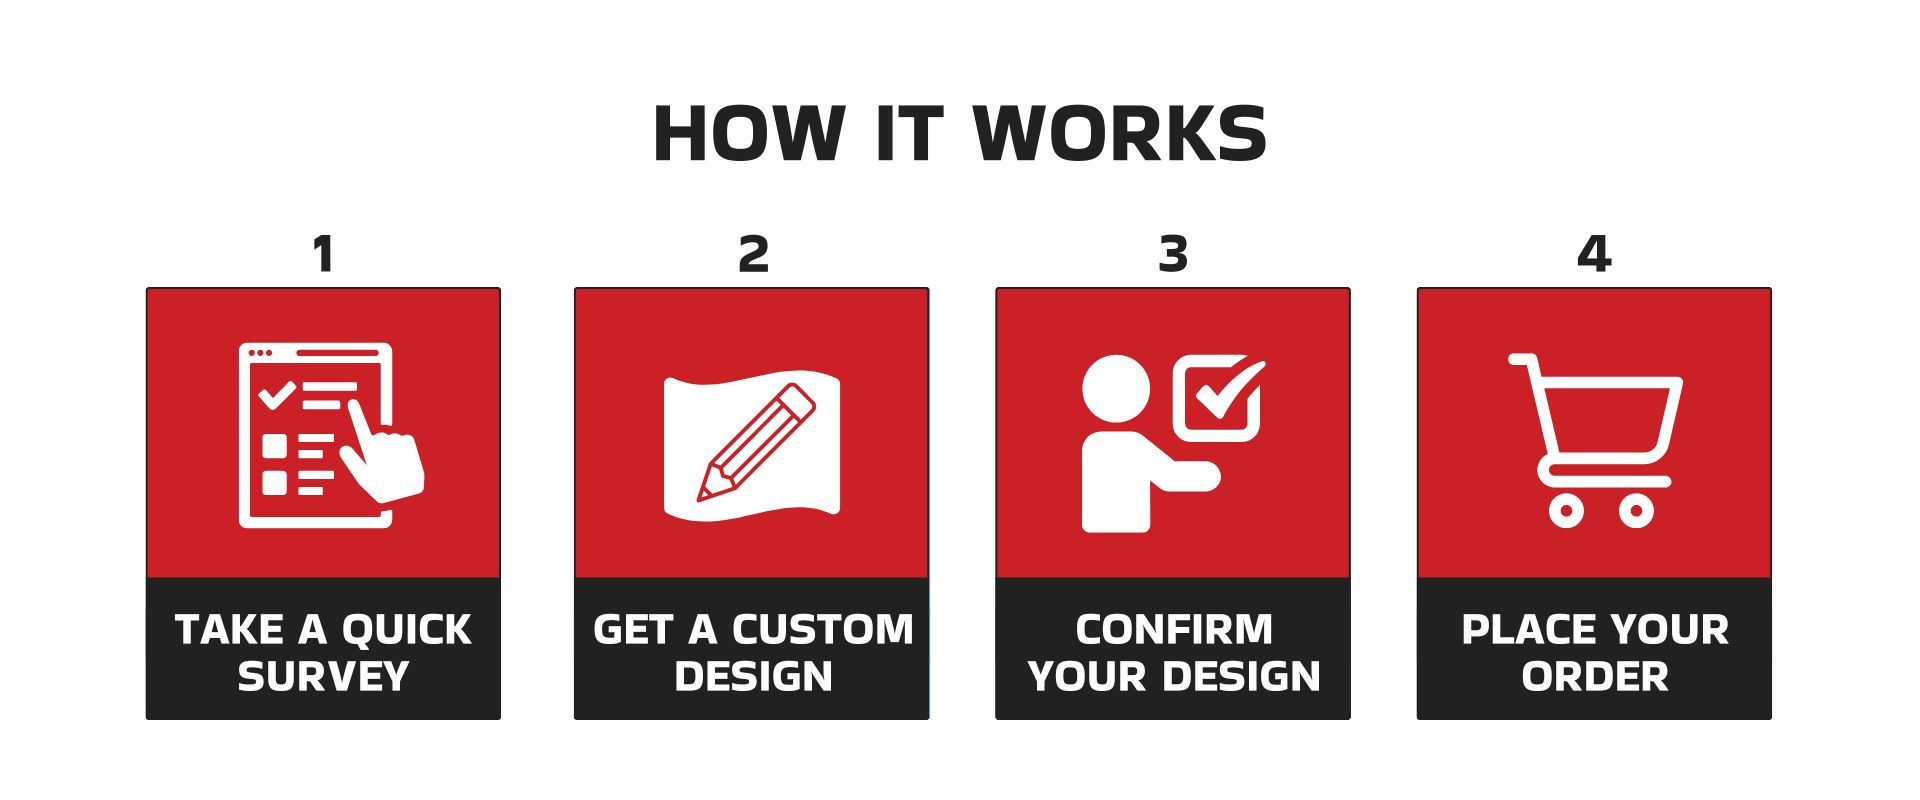 Step-by-step infographic explaining the custom flag ordering process: 1. Take a quick survey, 2. Get a custom design, 3. Confirm your design, 4. Place your order, against a red background for easy online customization.